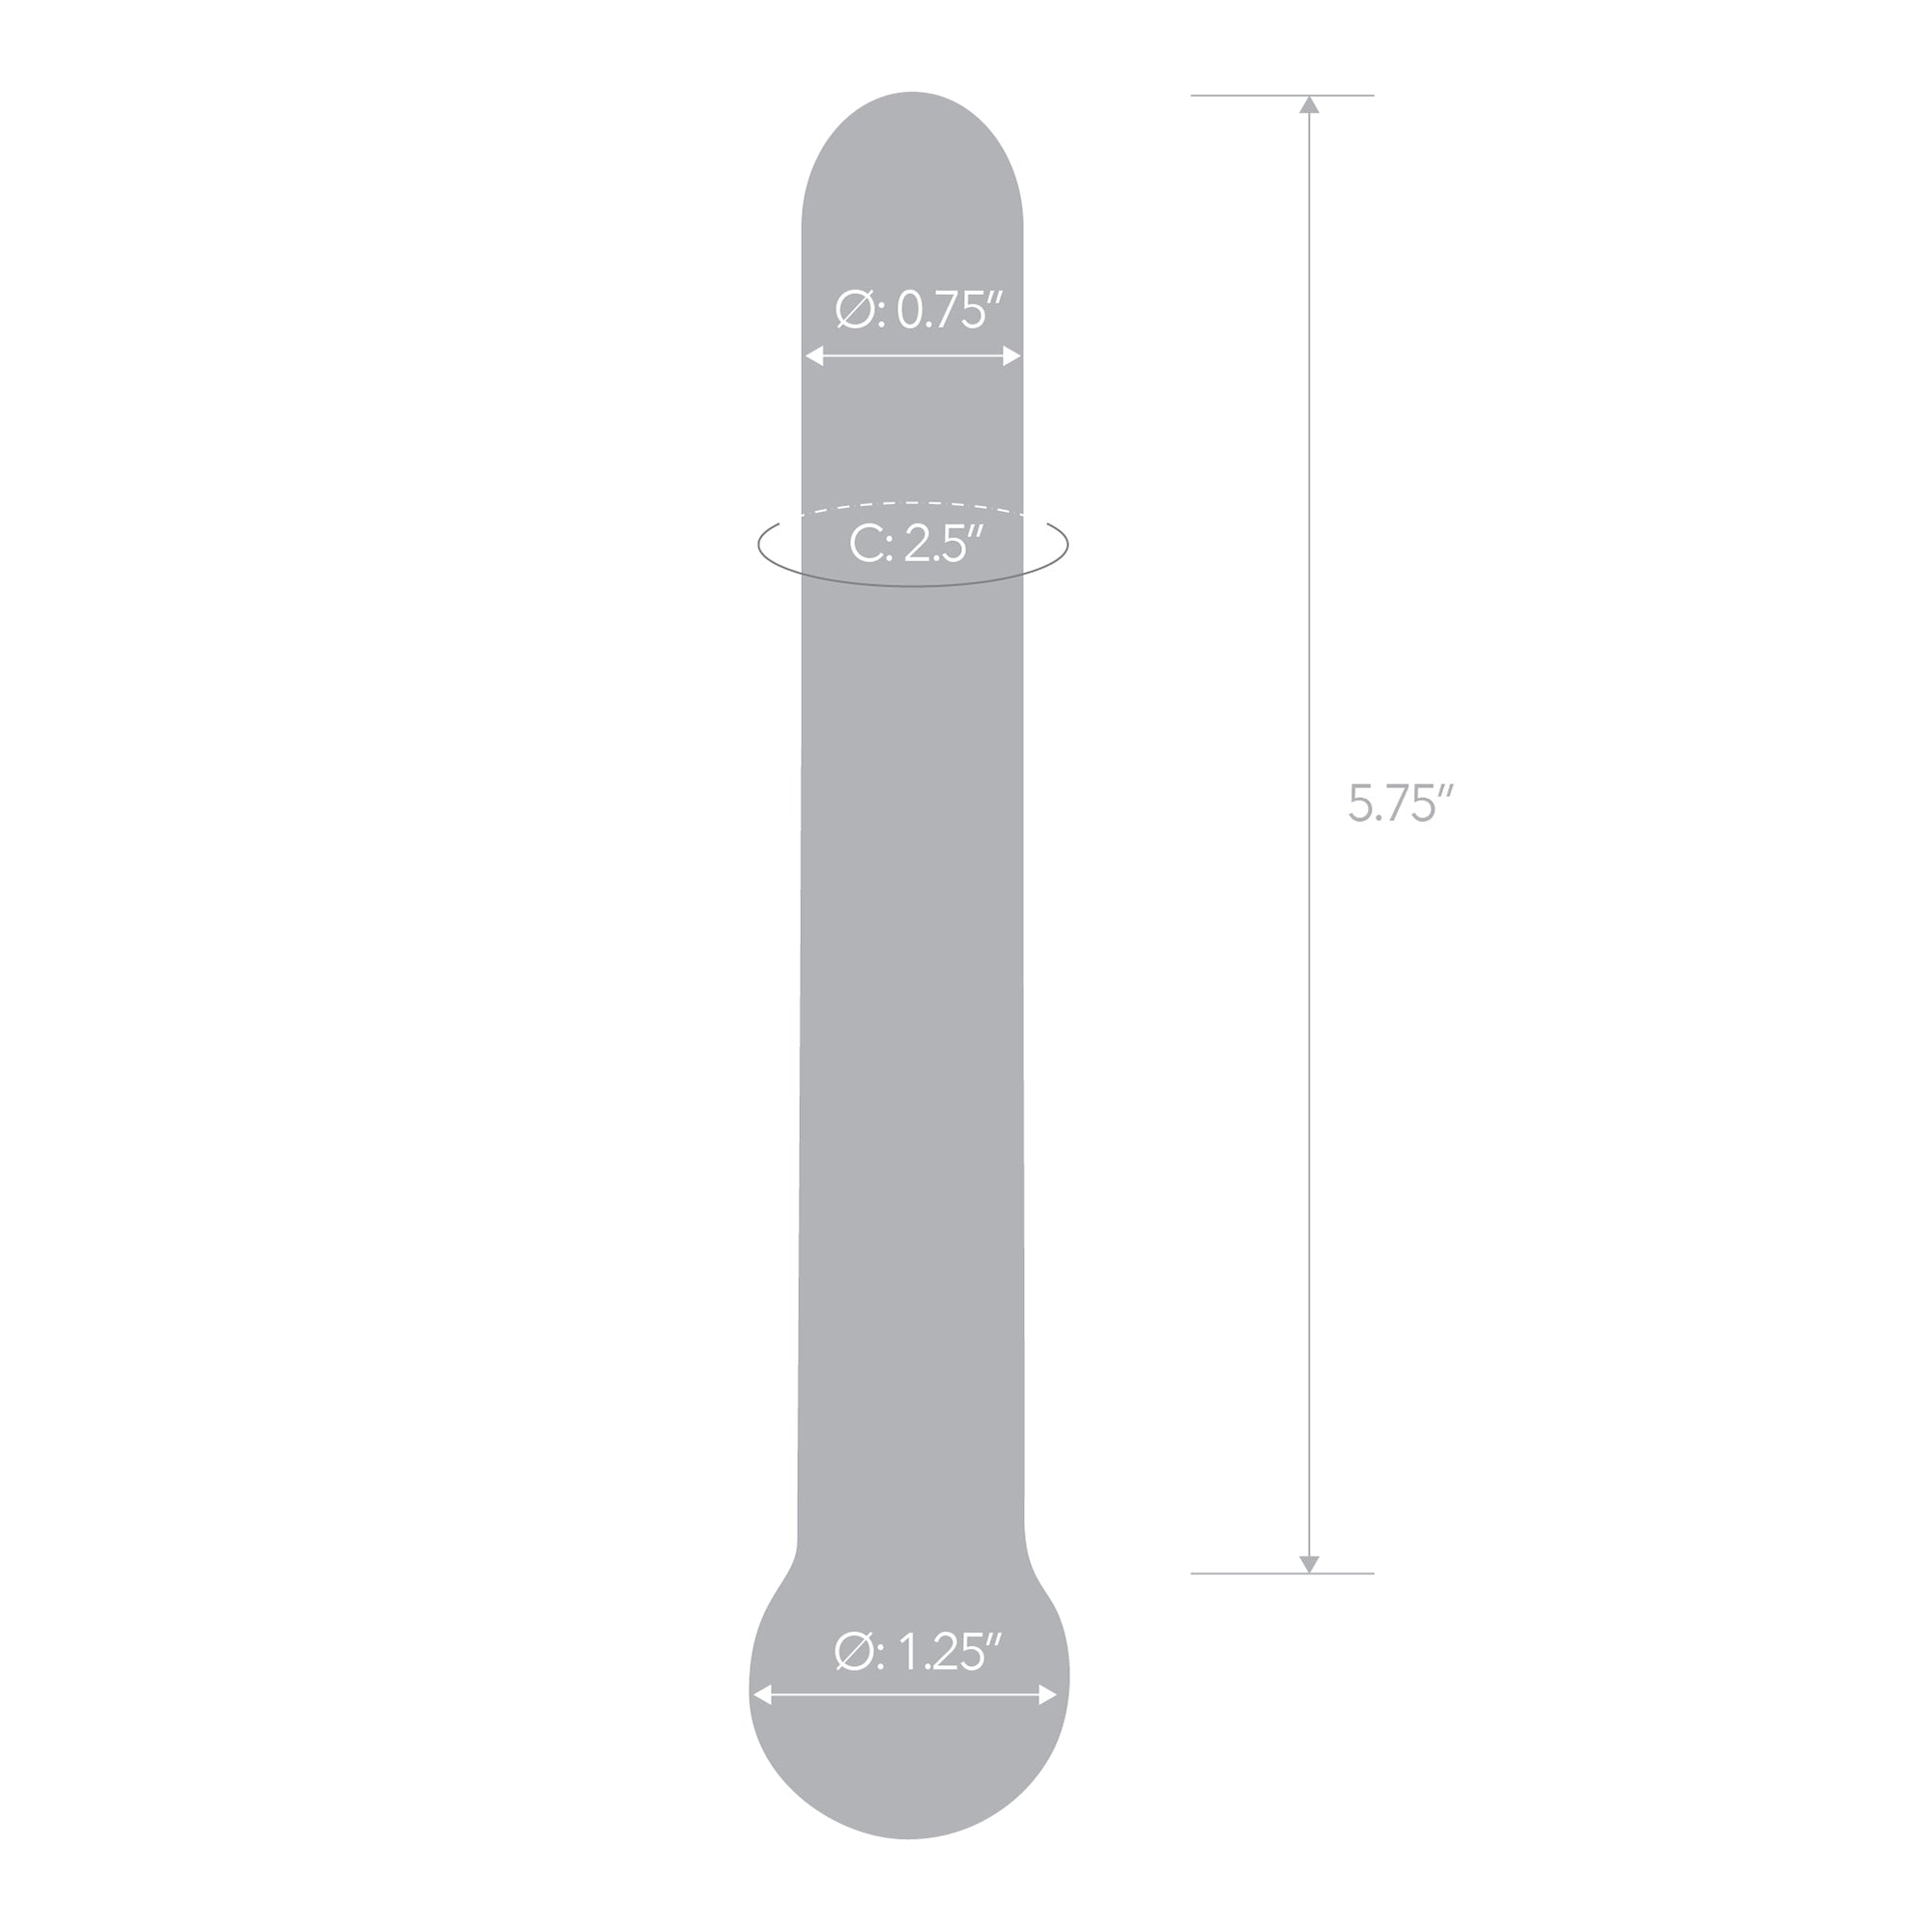 Specifications of the Gläs 7 inch Straight Glass Dildo